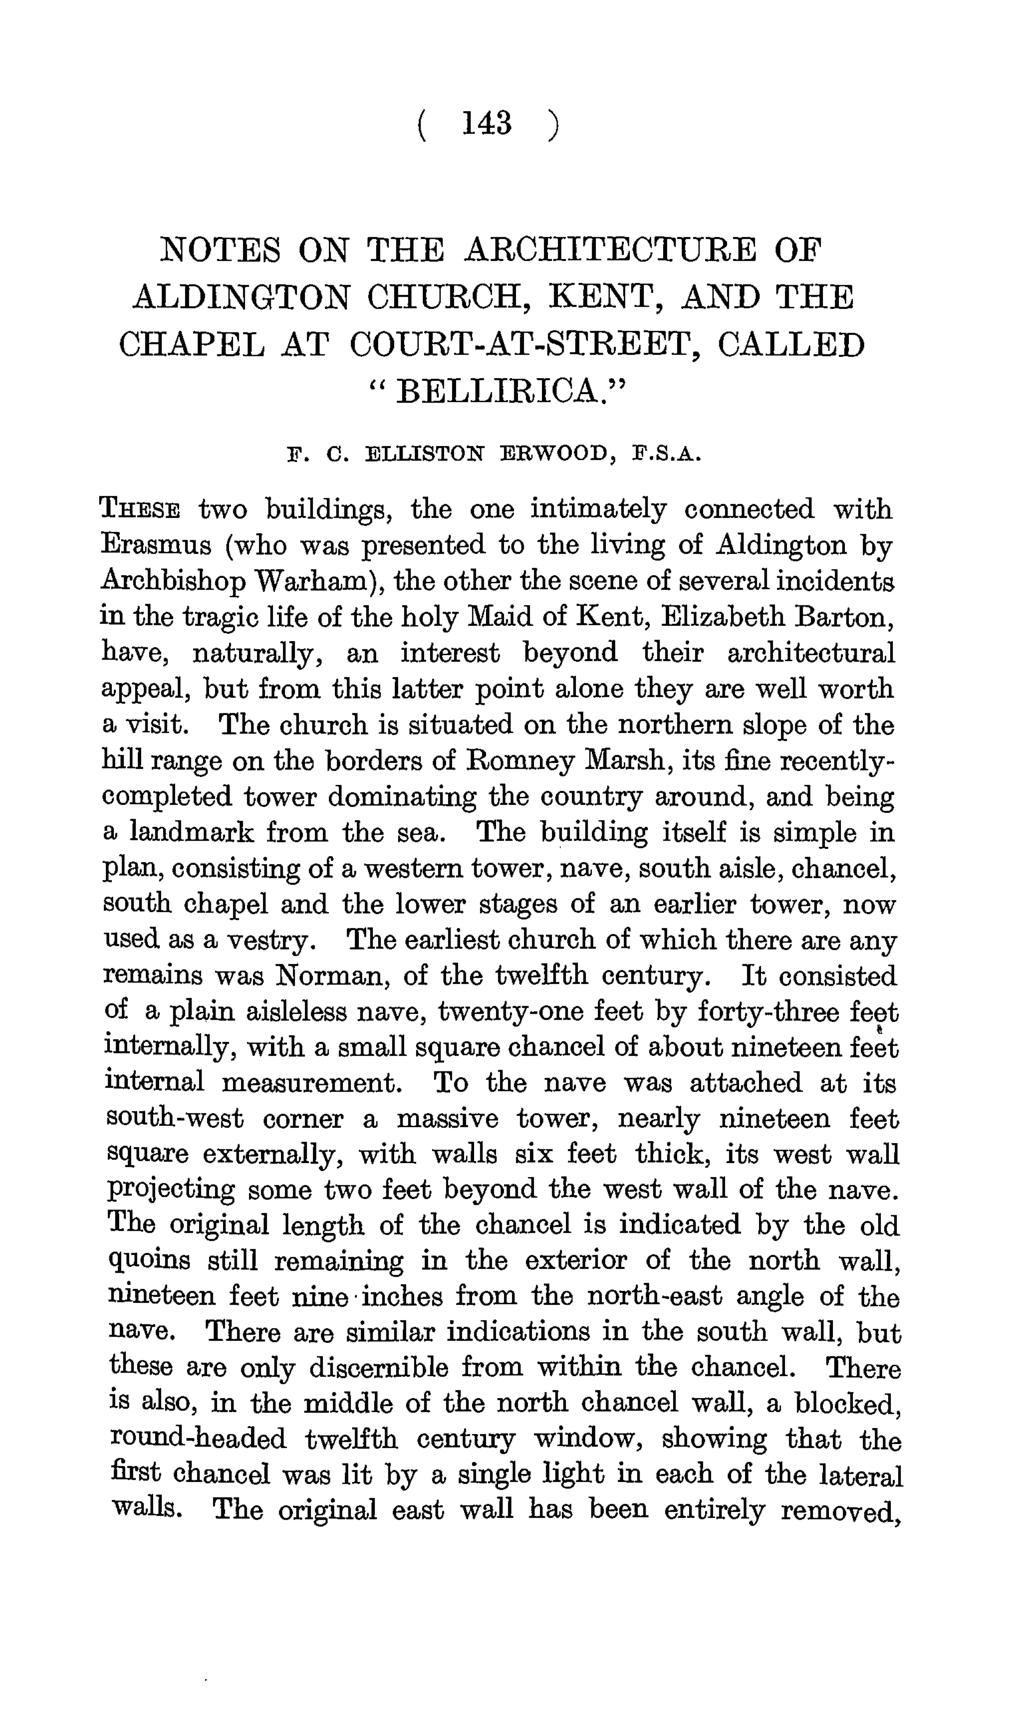 Archaeologia Cantiana Vol. 41 1929 ( 143 ) NOTES ON THE ARCHITECTURE OF ALDINGTON CHURCH, KENT, AND THE CHAPEL AT COURT-AT-STREET, CALLED " BELLIRICA." F. 0. ELLISTCXN EKWOOD, P.S.A. THESE two buildings, the one intimately connected with.